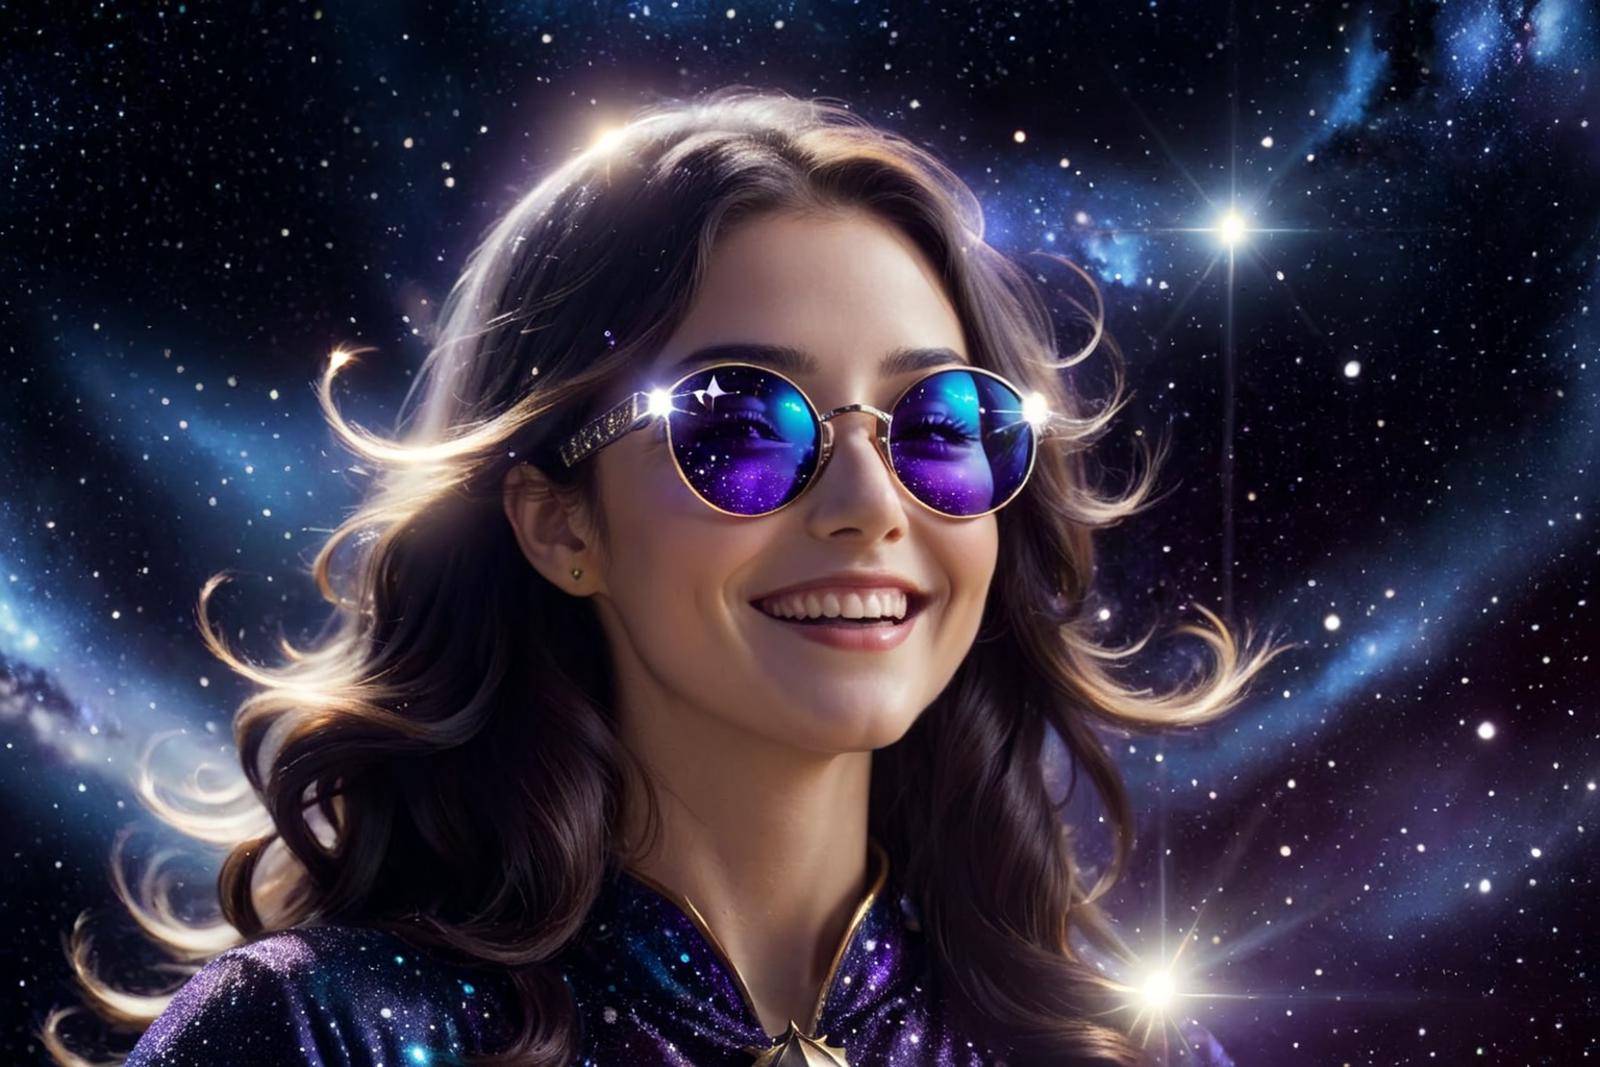 A smiling woman wearing blue sunglasses and a purple shirt, surrounded by stars.